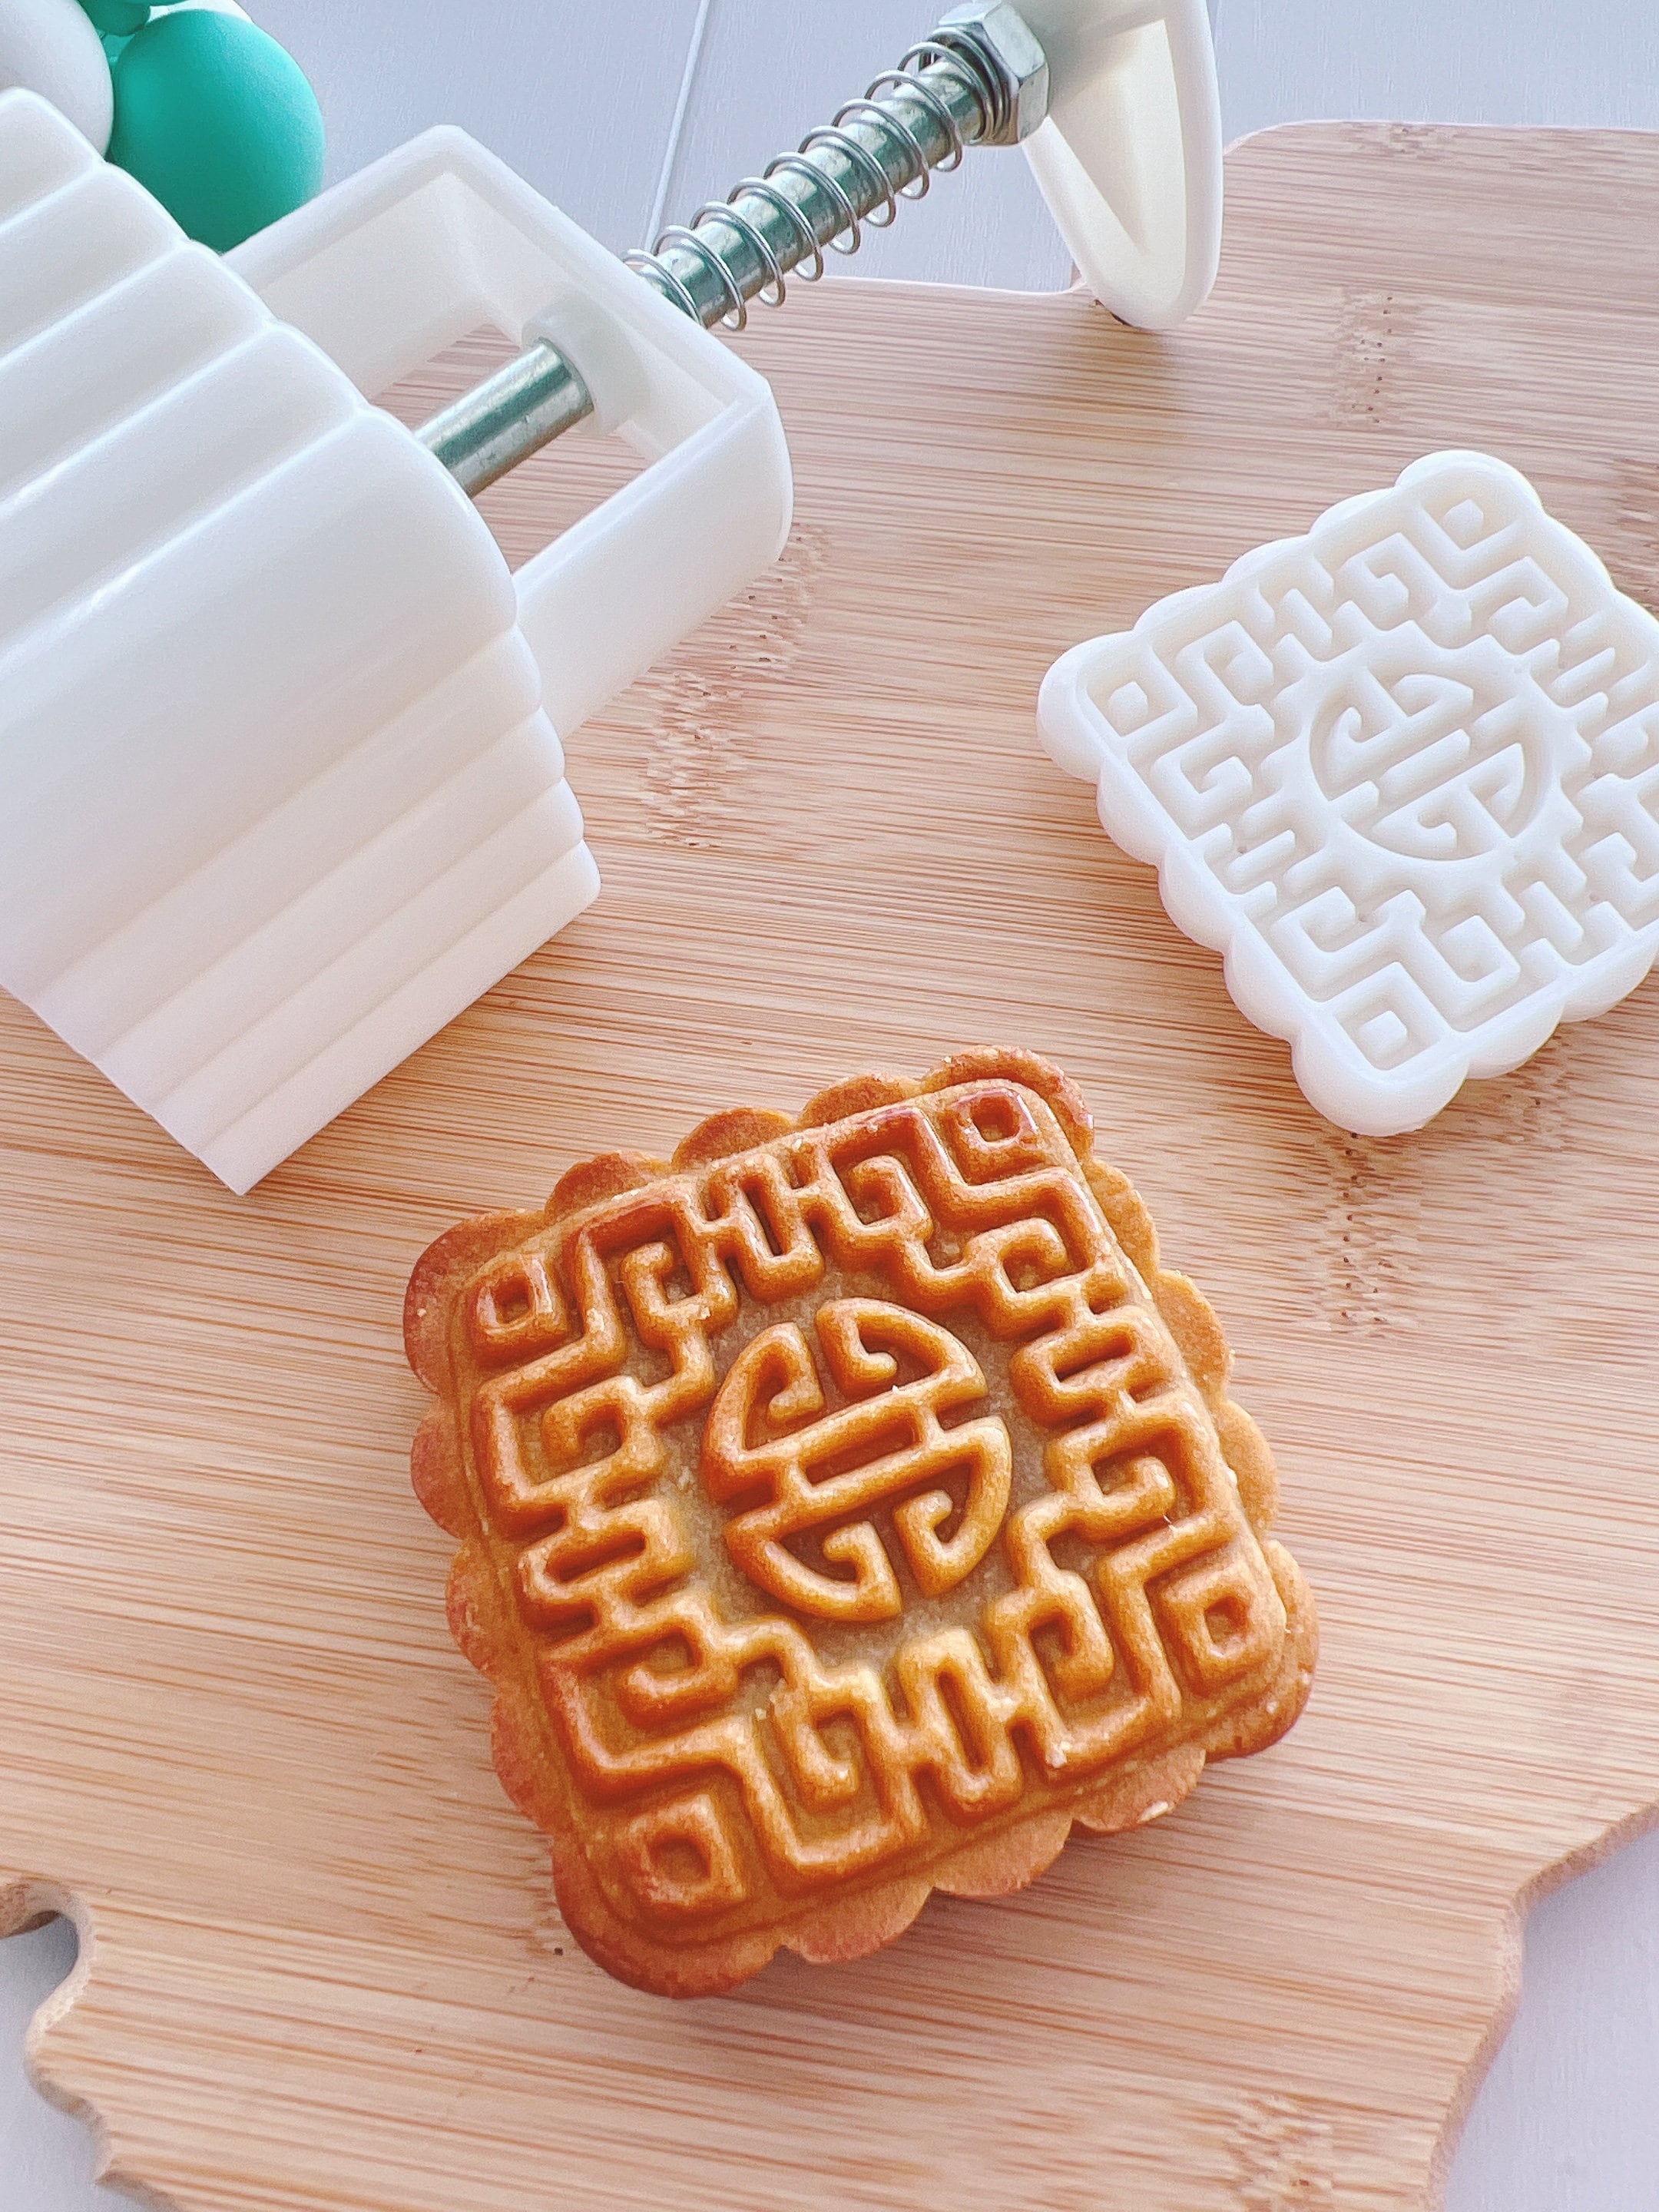 Mooncakes and pastries tasting box for bulk orders. NO gift box included.